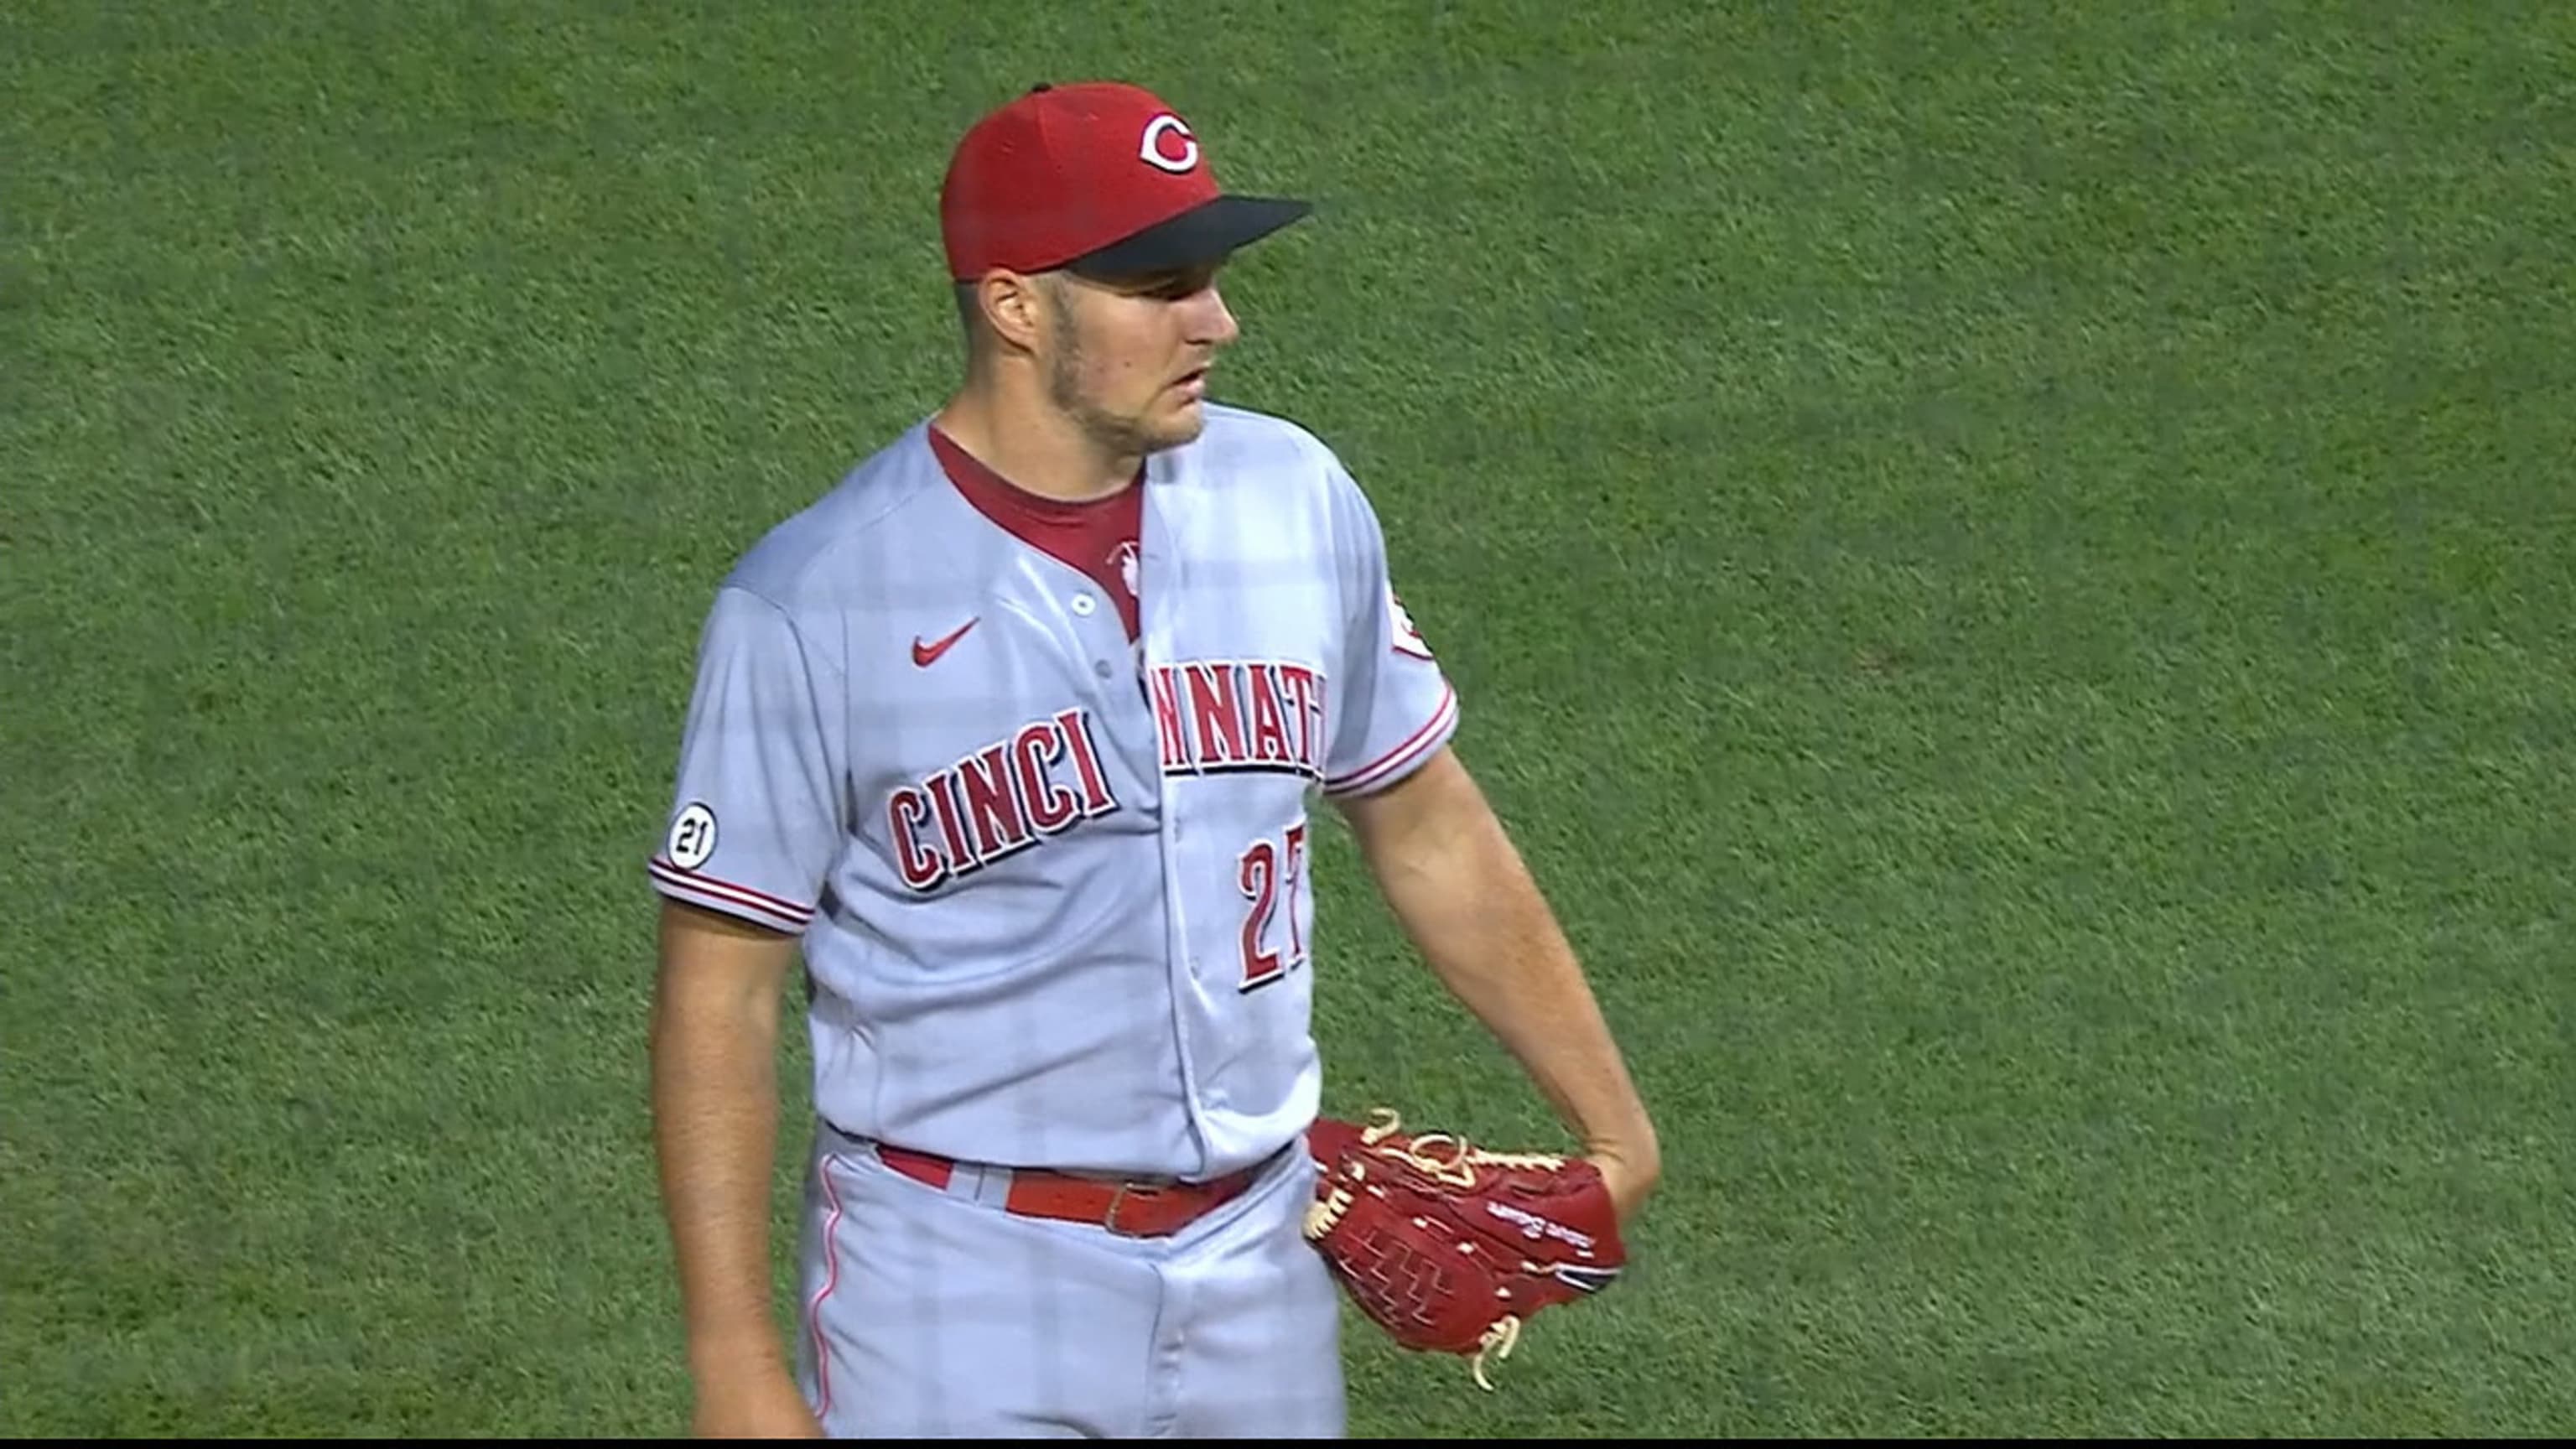 Trevor Bauer receives his 2020 Cy Young Award before Reds vs. Dodgers